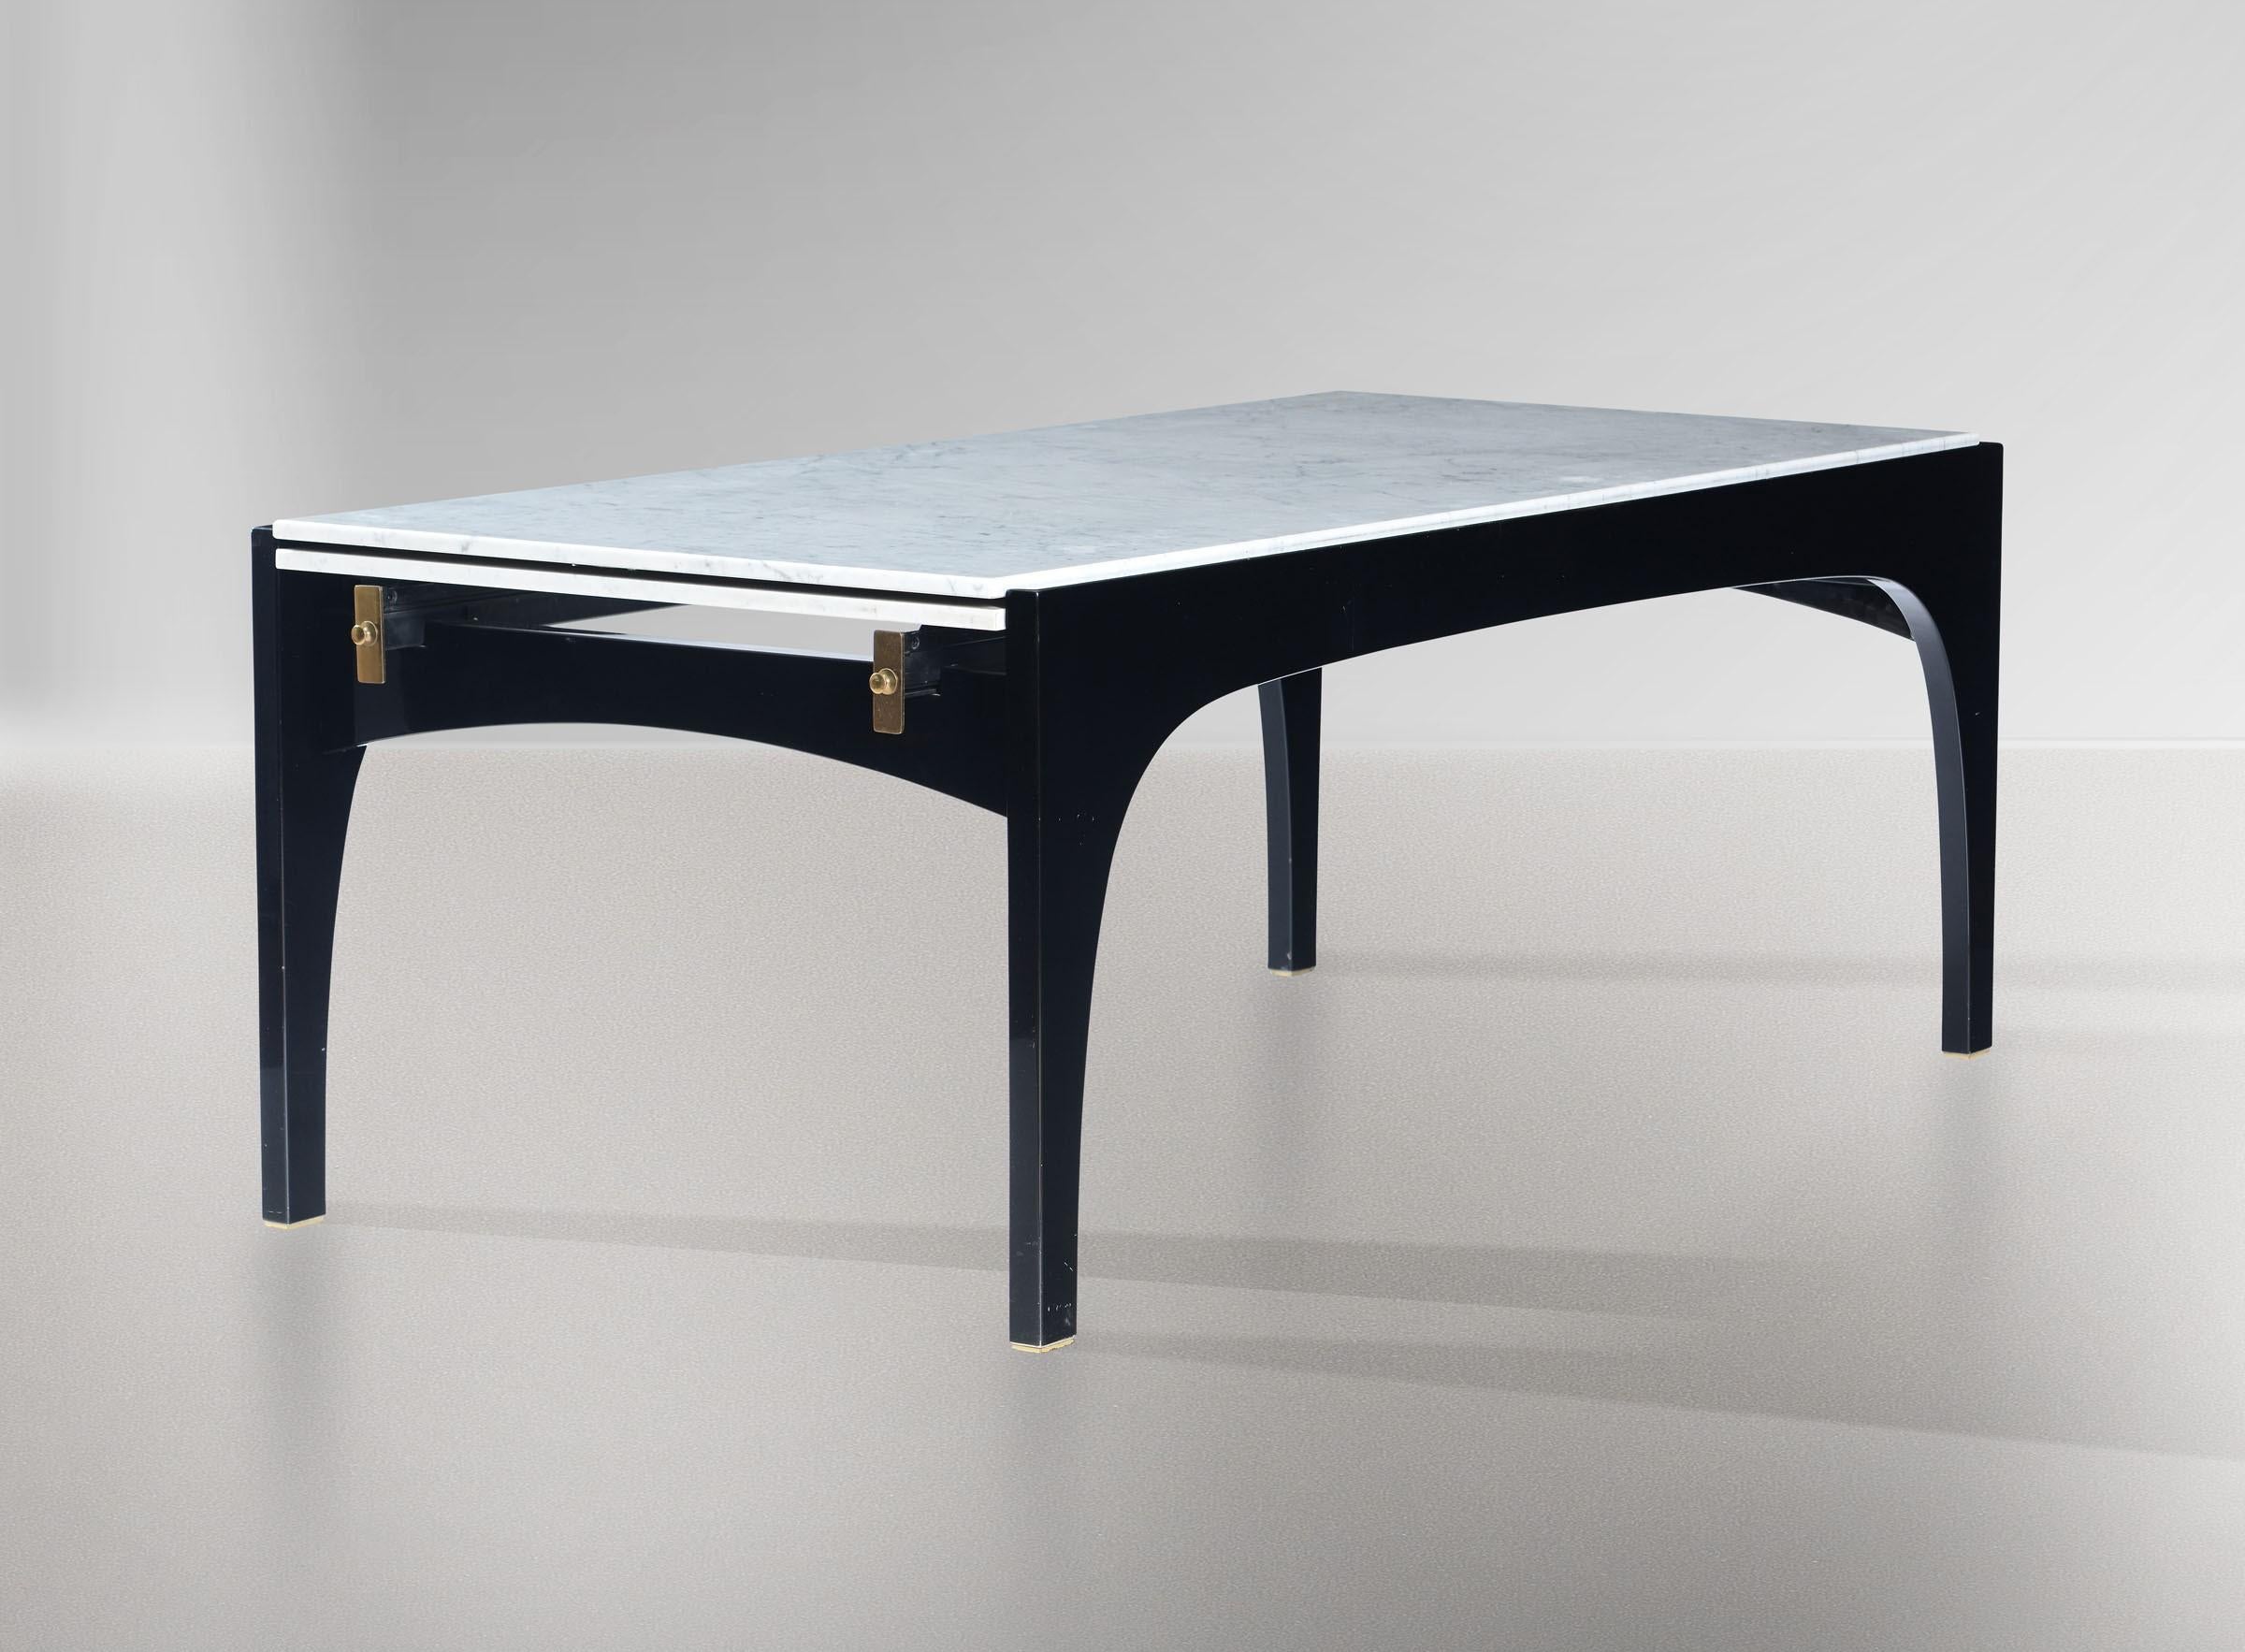 An exceptional and rare extendable dining table designed by Ignazio Gardella for Misura Emme, Italy, circa 1985. This impressive rectangular table is black lacquered with brass detailing and has an amazing engineered system for extending the Carrara